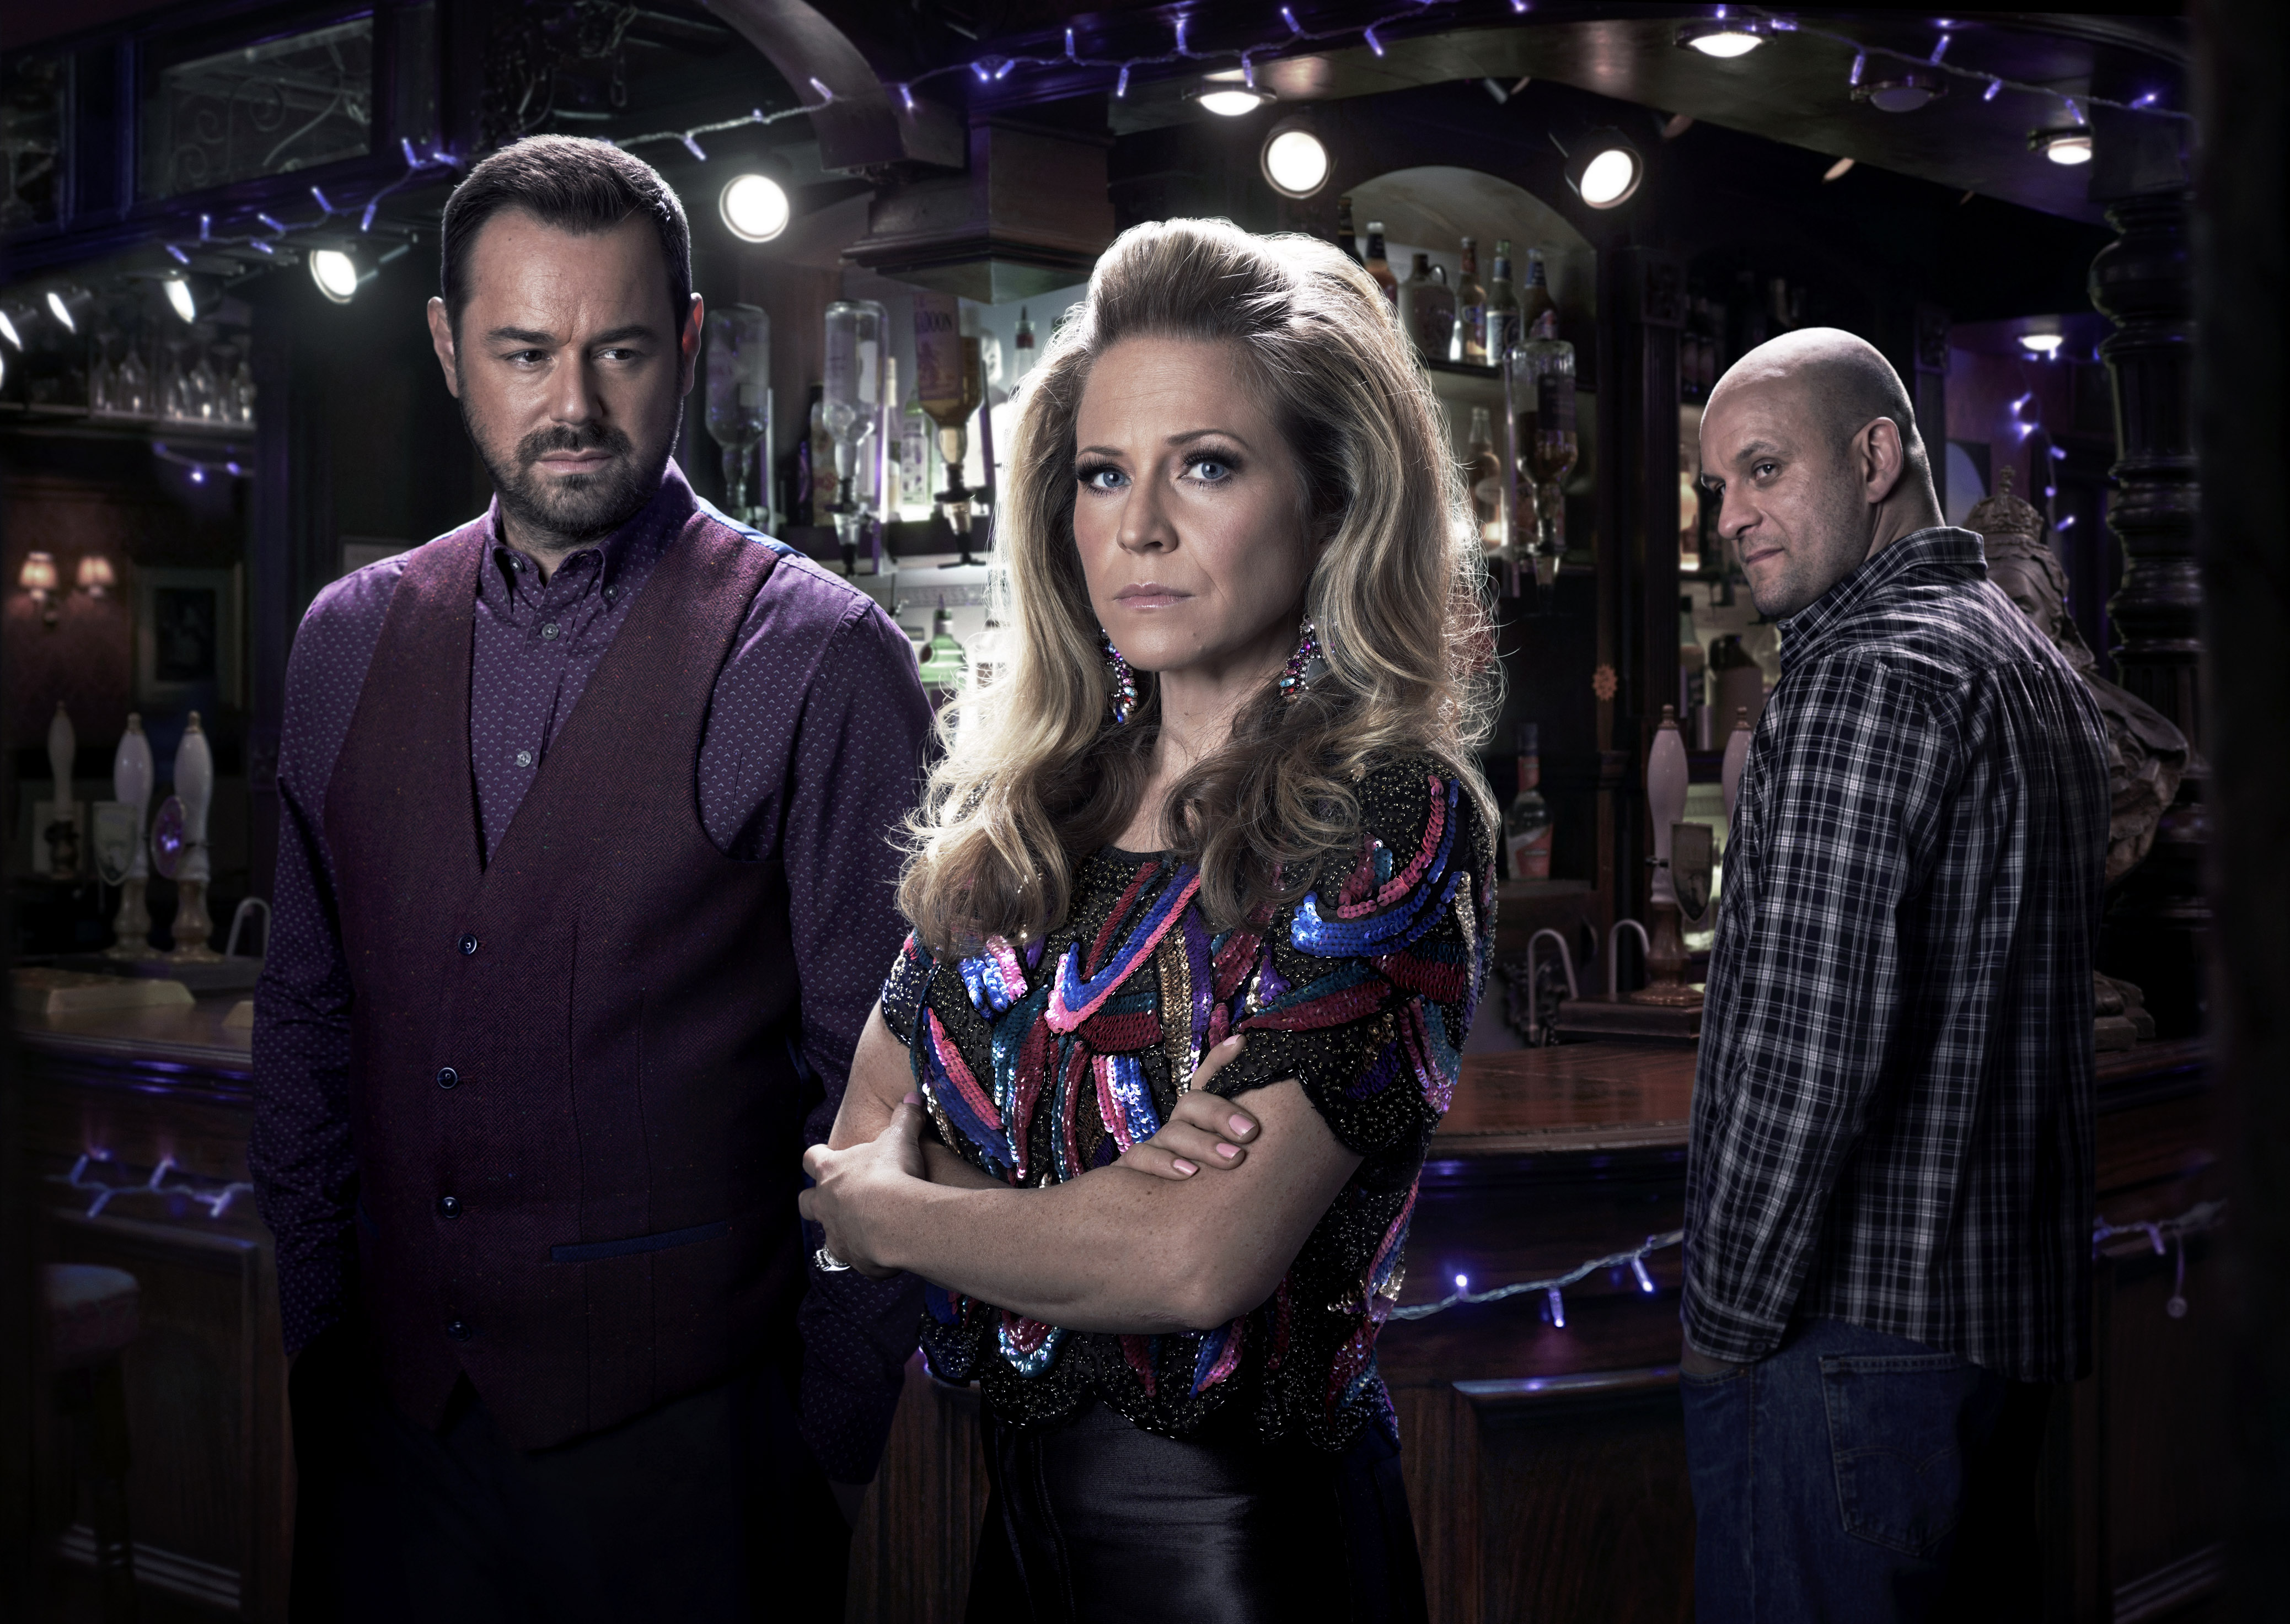 Ricky Champ, right, keeps an eye on Danny Dyer’s Mick and Kellie Bright as Linda in EastEnders (BBC /Kieron McCarron)